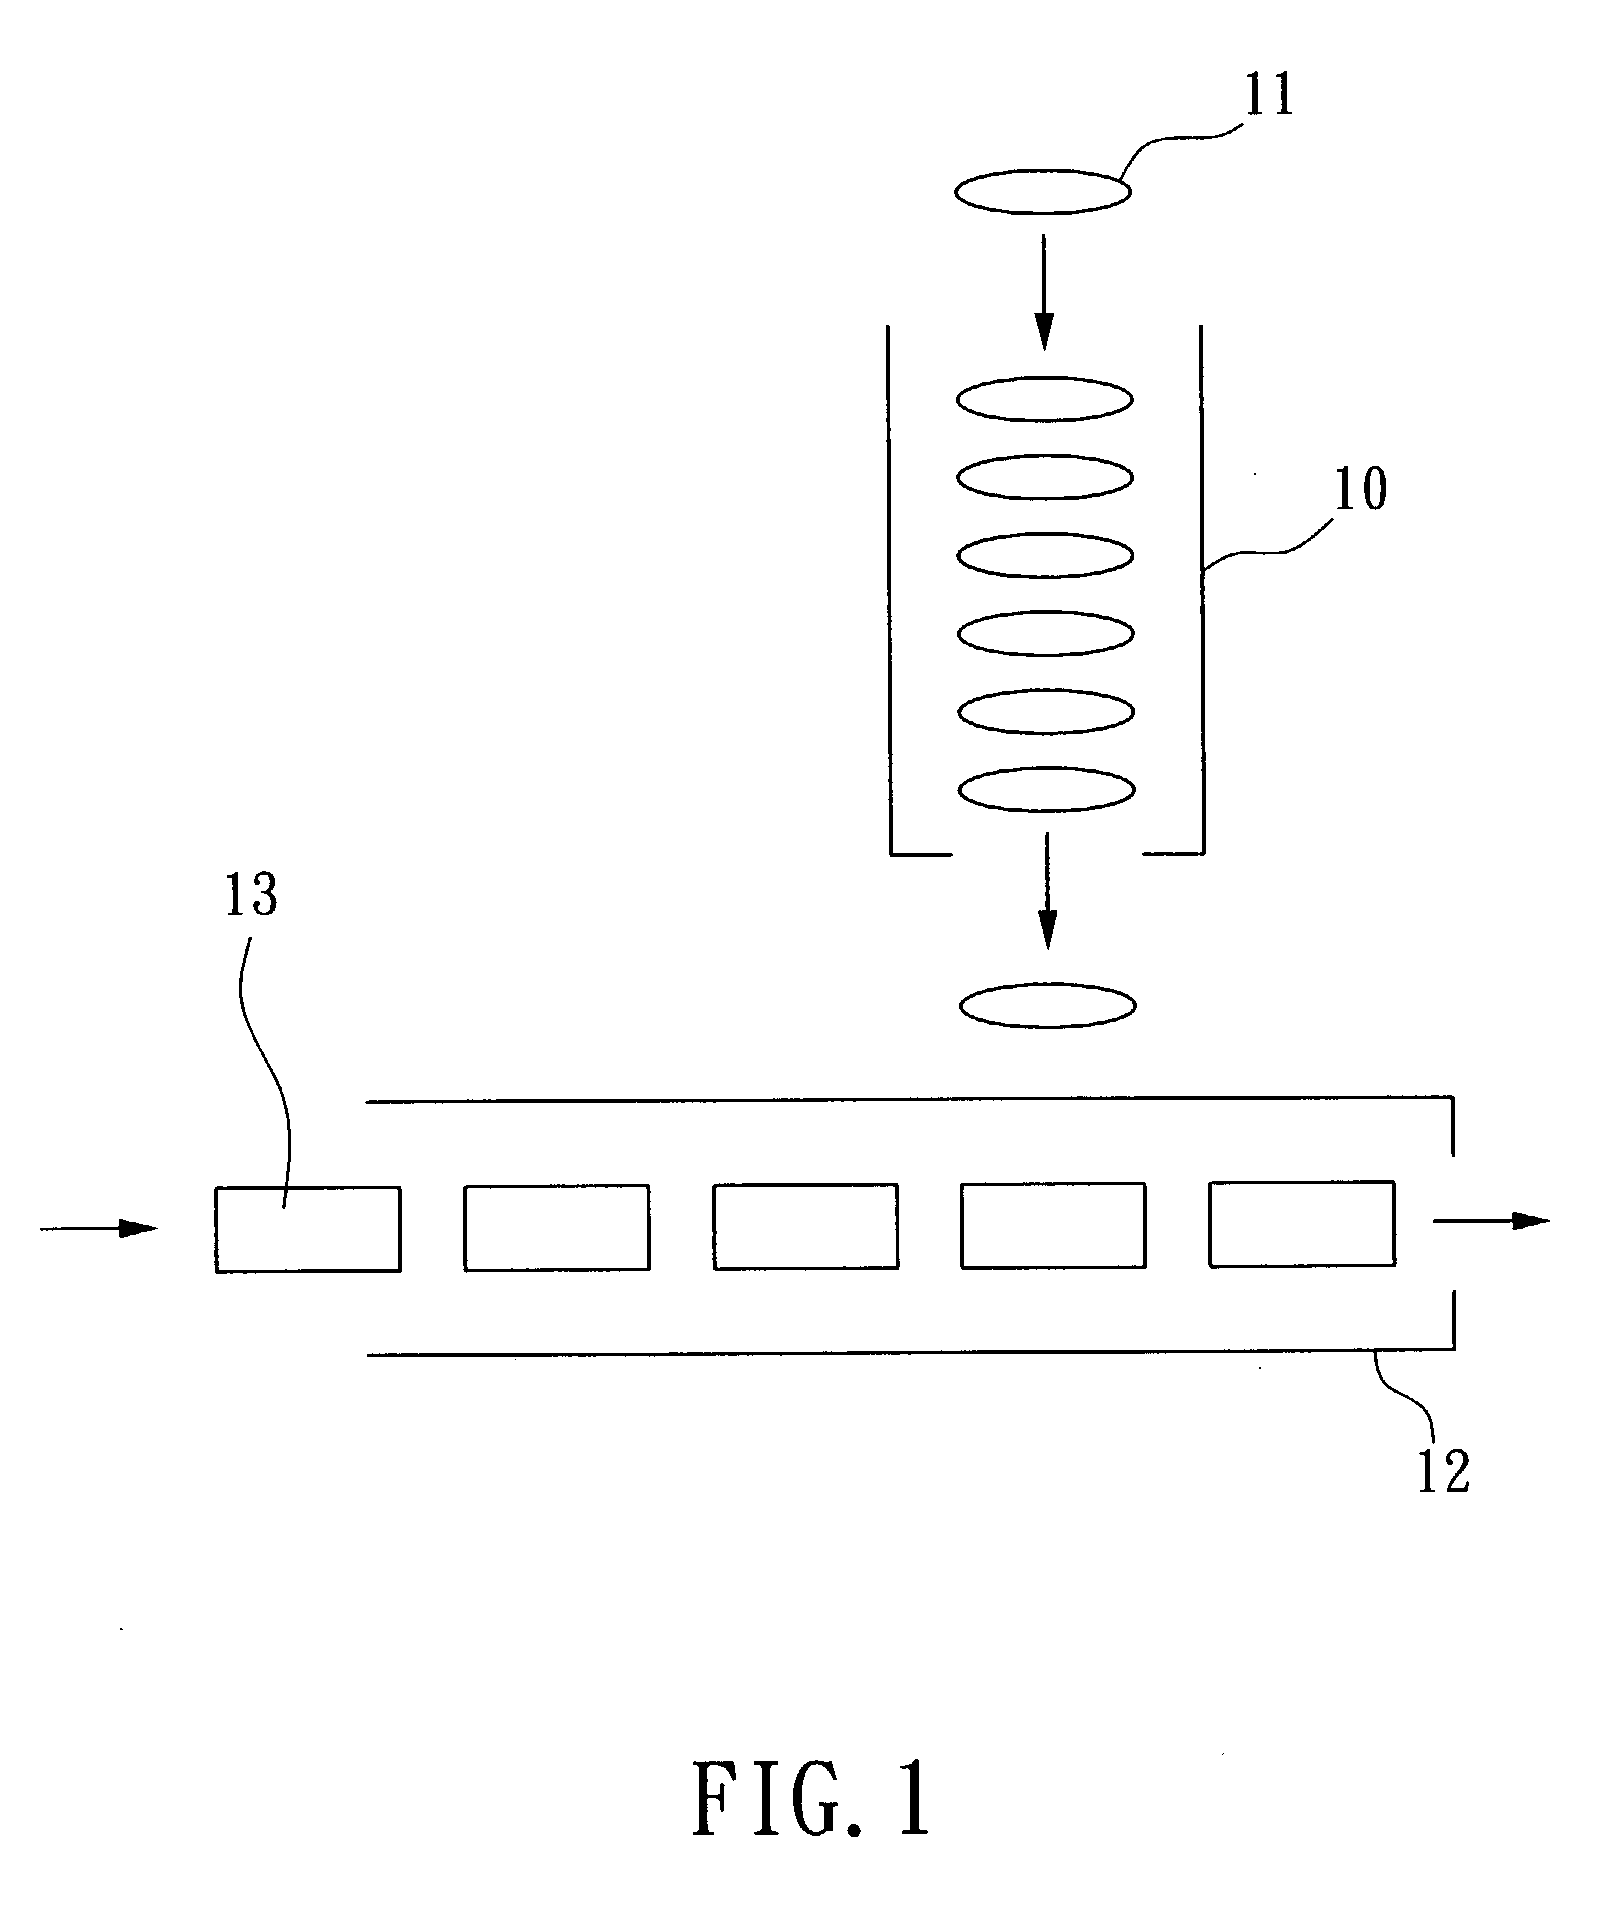 Apparatus and method for bandwidth control